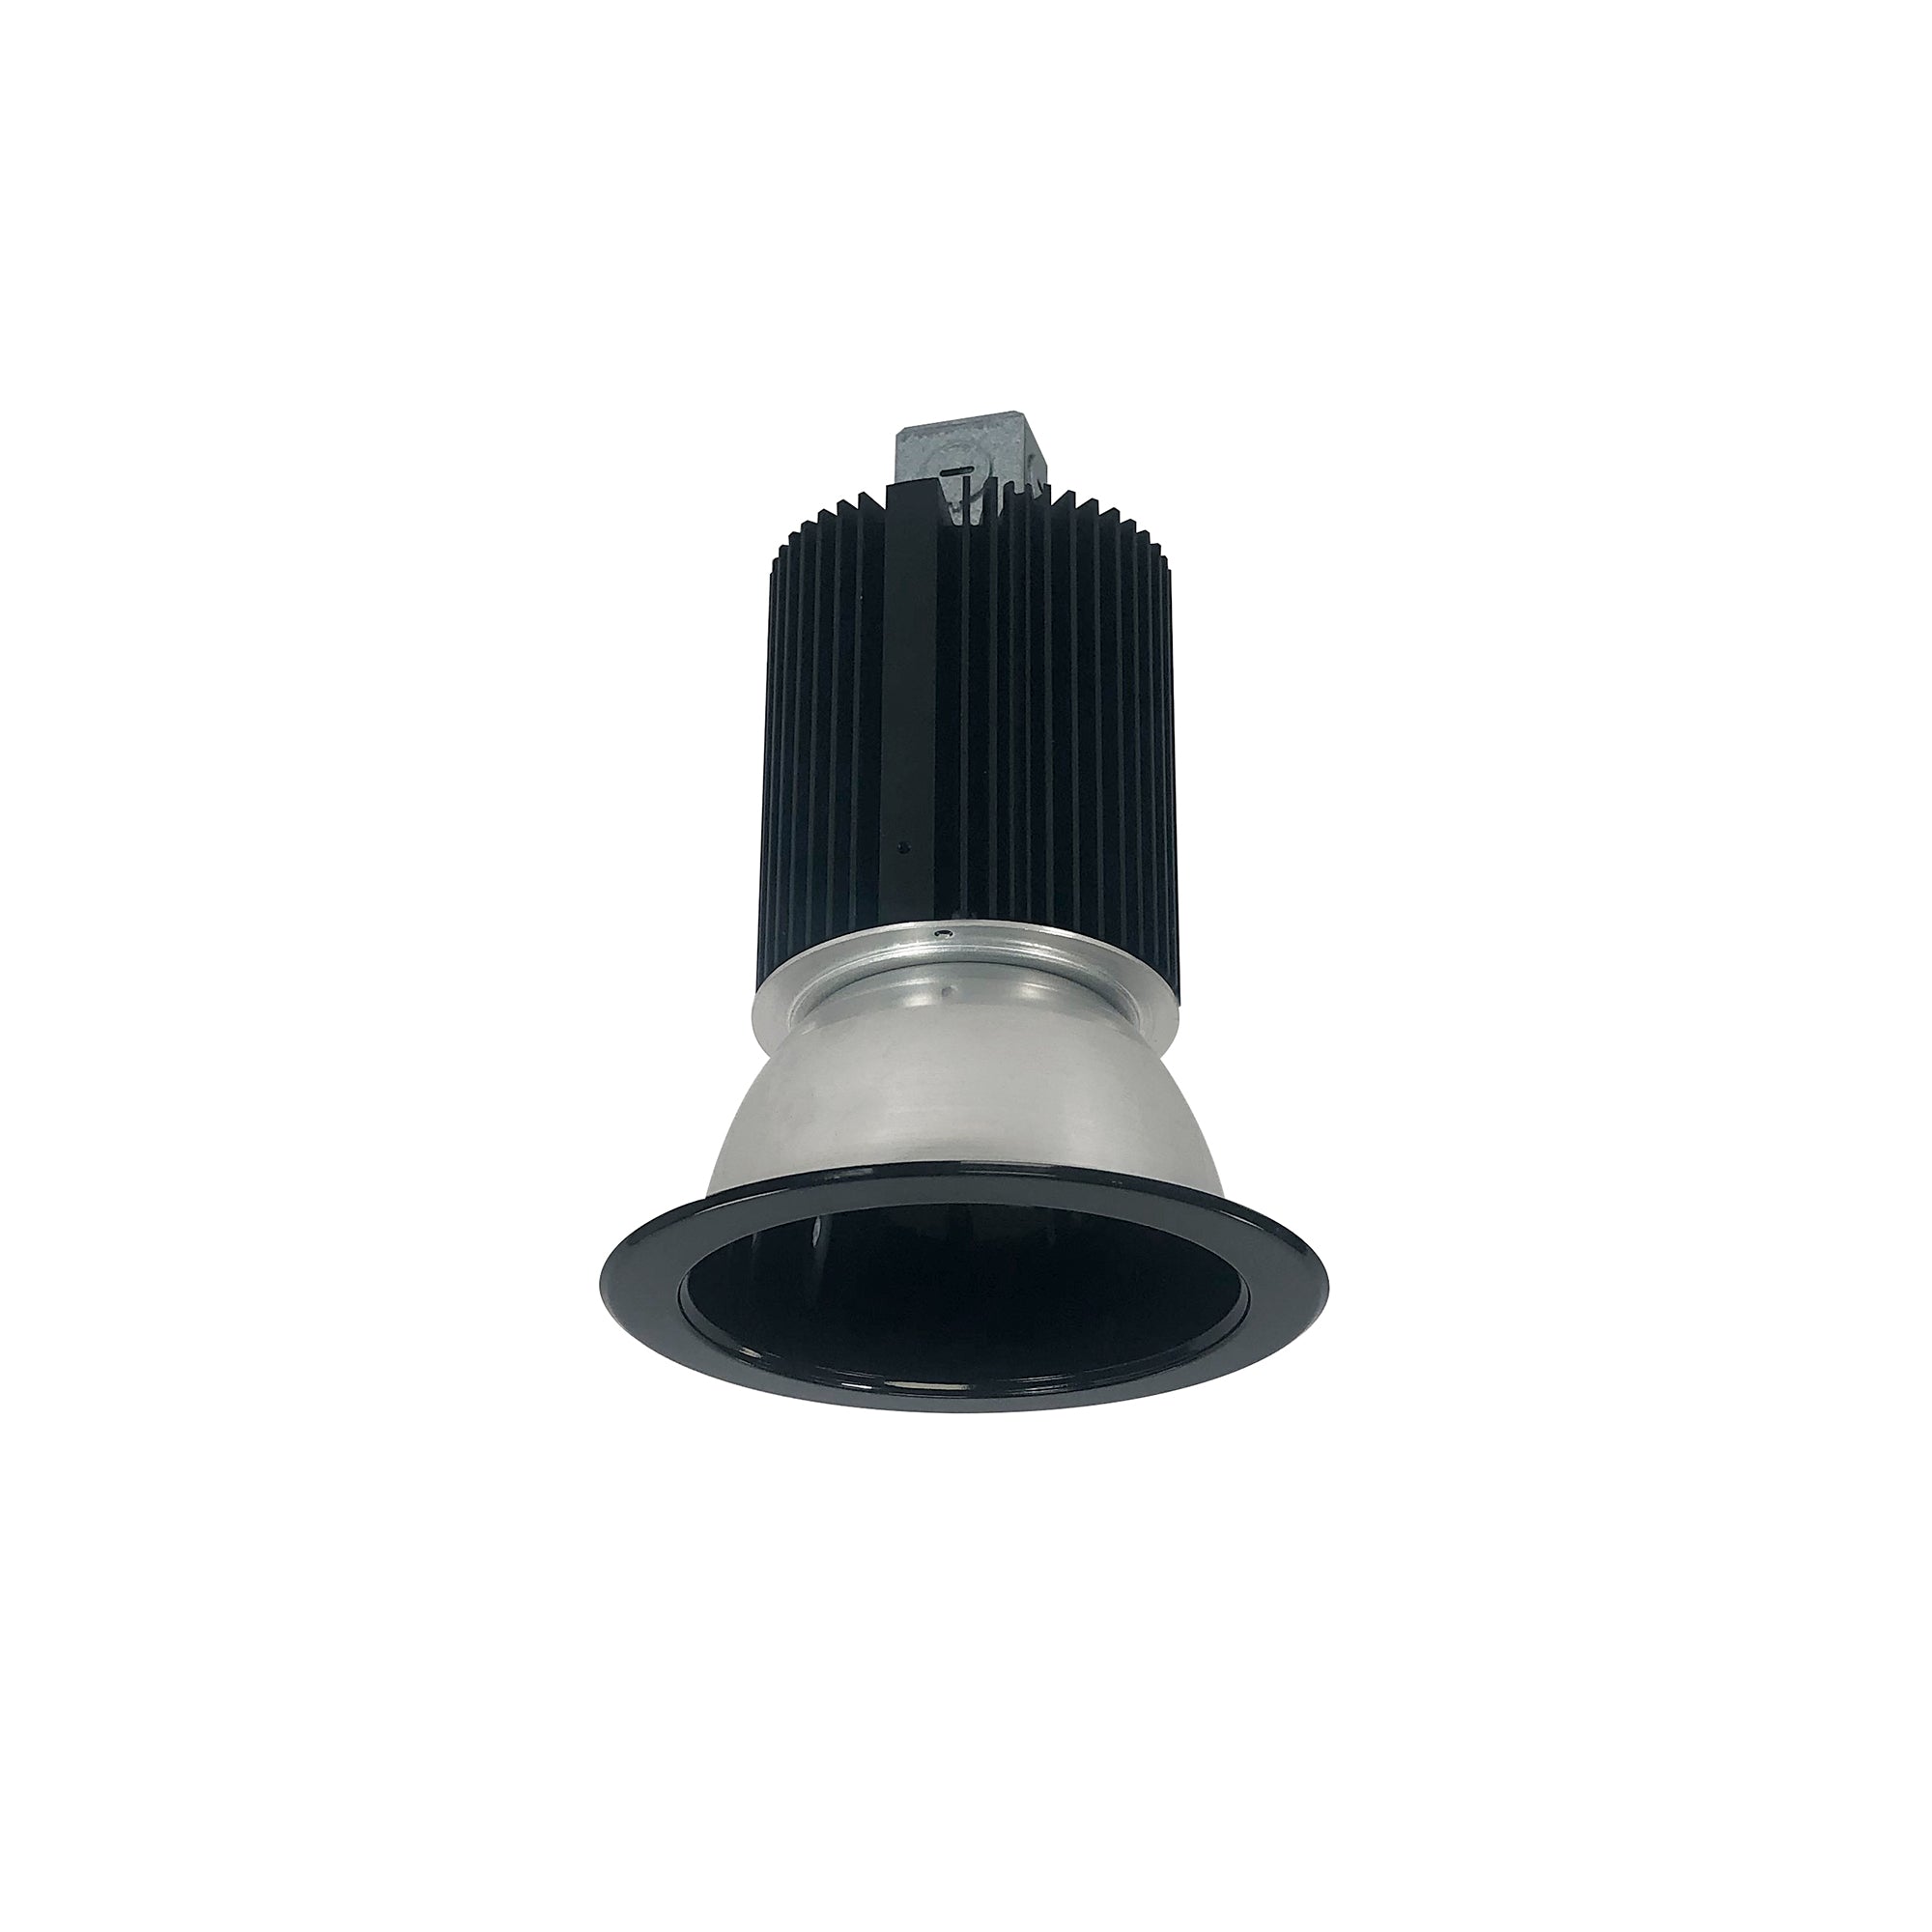 Nora Lighting NC2-431L1540MBSF - Recessed - 4 Inch Sapphire II Open Reflector, 1500lm, 4000K, 40-Degrees Narrow Flood, Black Self Flanged